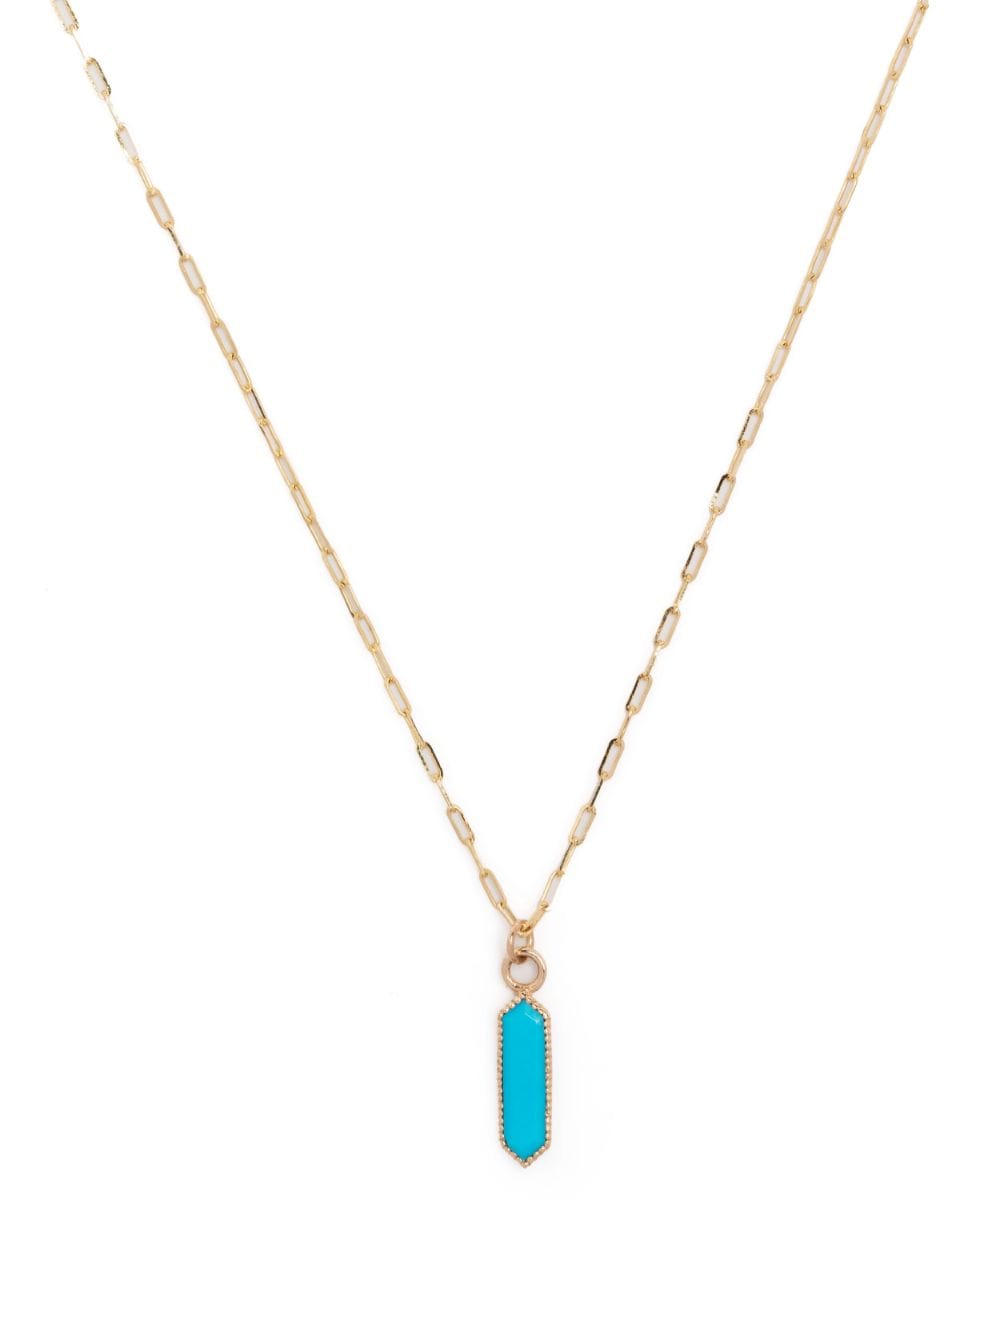 Metier by Tom Foolery 14kt yellow gold Astra Hexa turquoise necklace